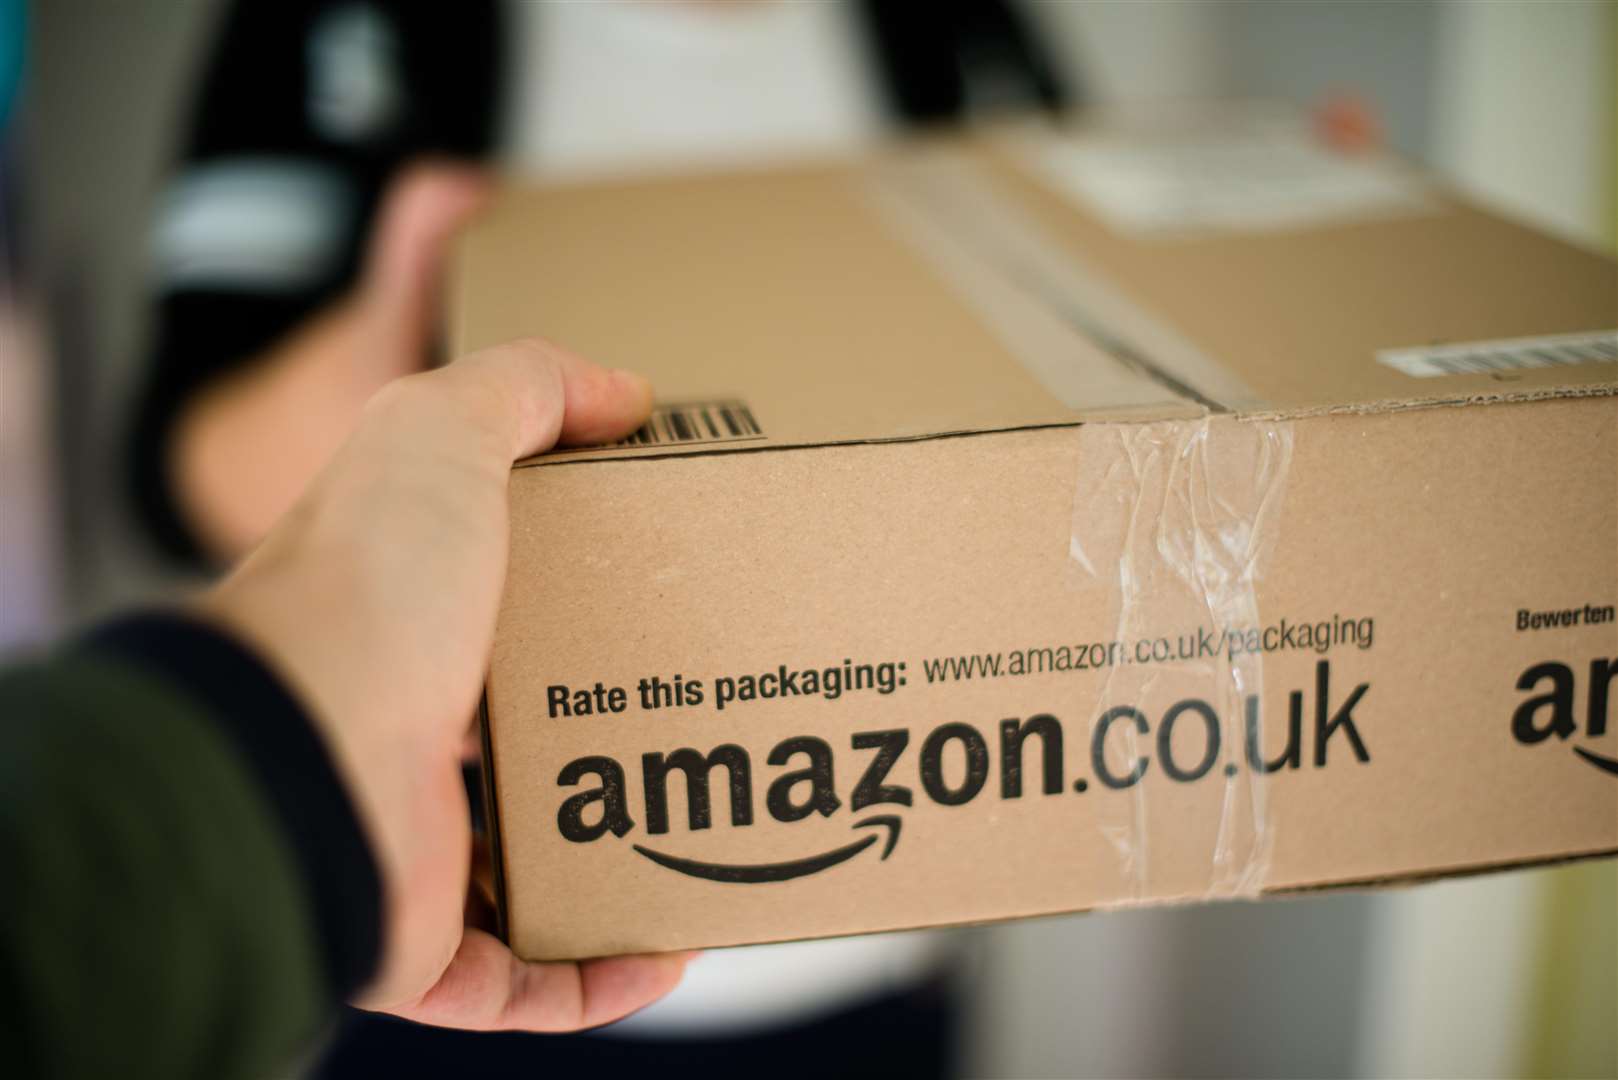 Amazon is building a sorting centre in Medway